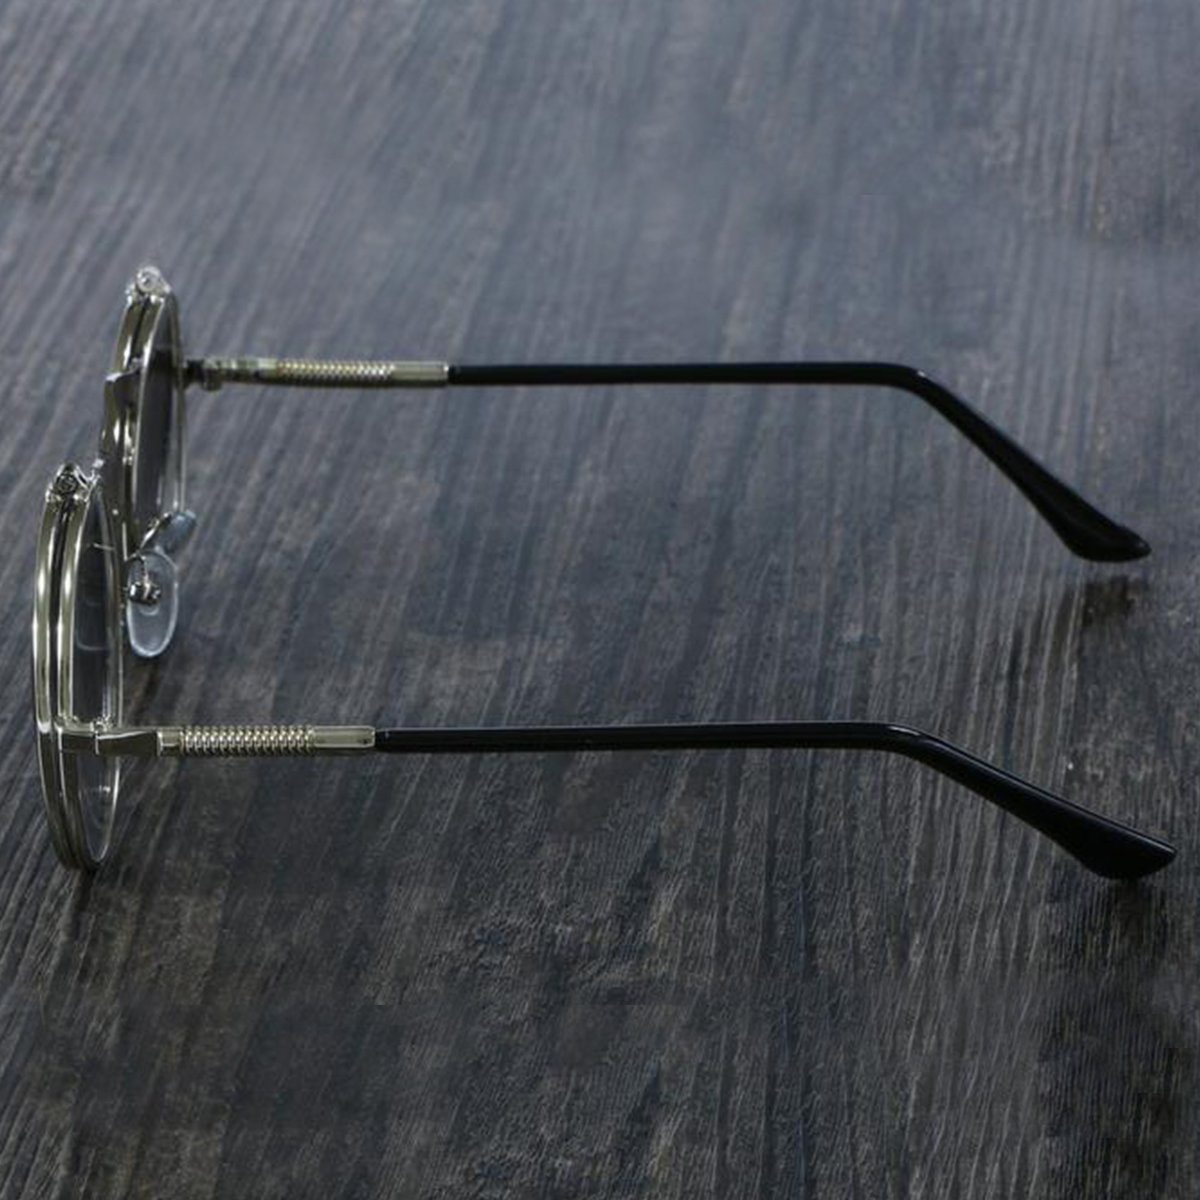 A pair of Steampunk Flip-Up Round Double Lens sunglasses on a wooden table.